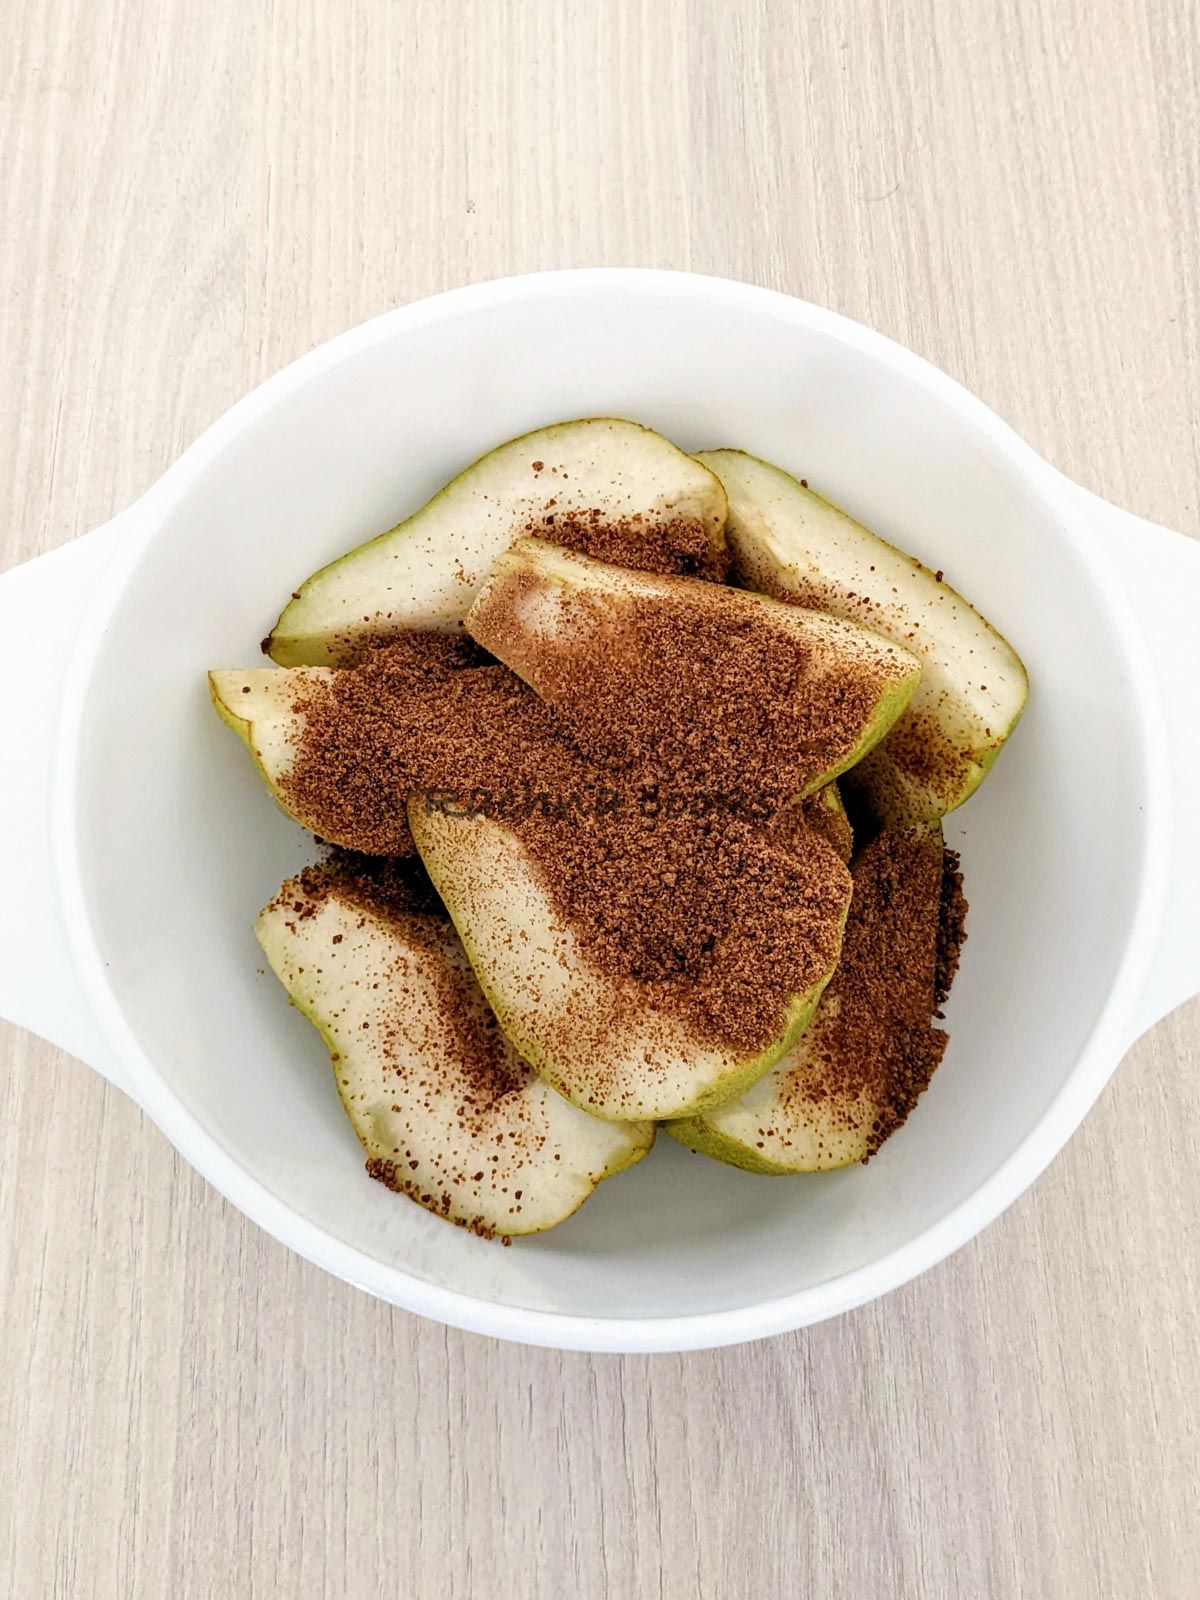 Brown sugar and cinnamon sprinkled all over pear segments.